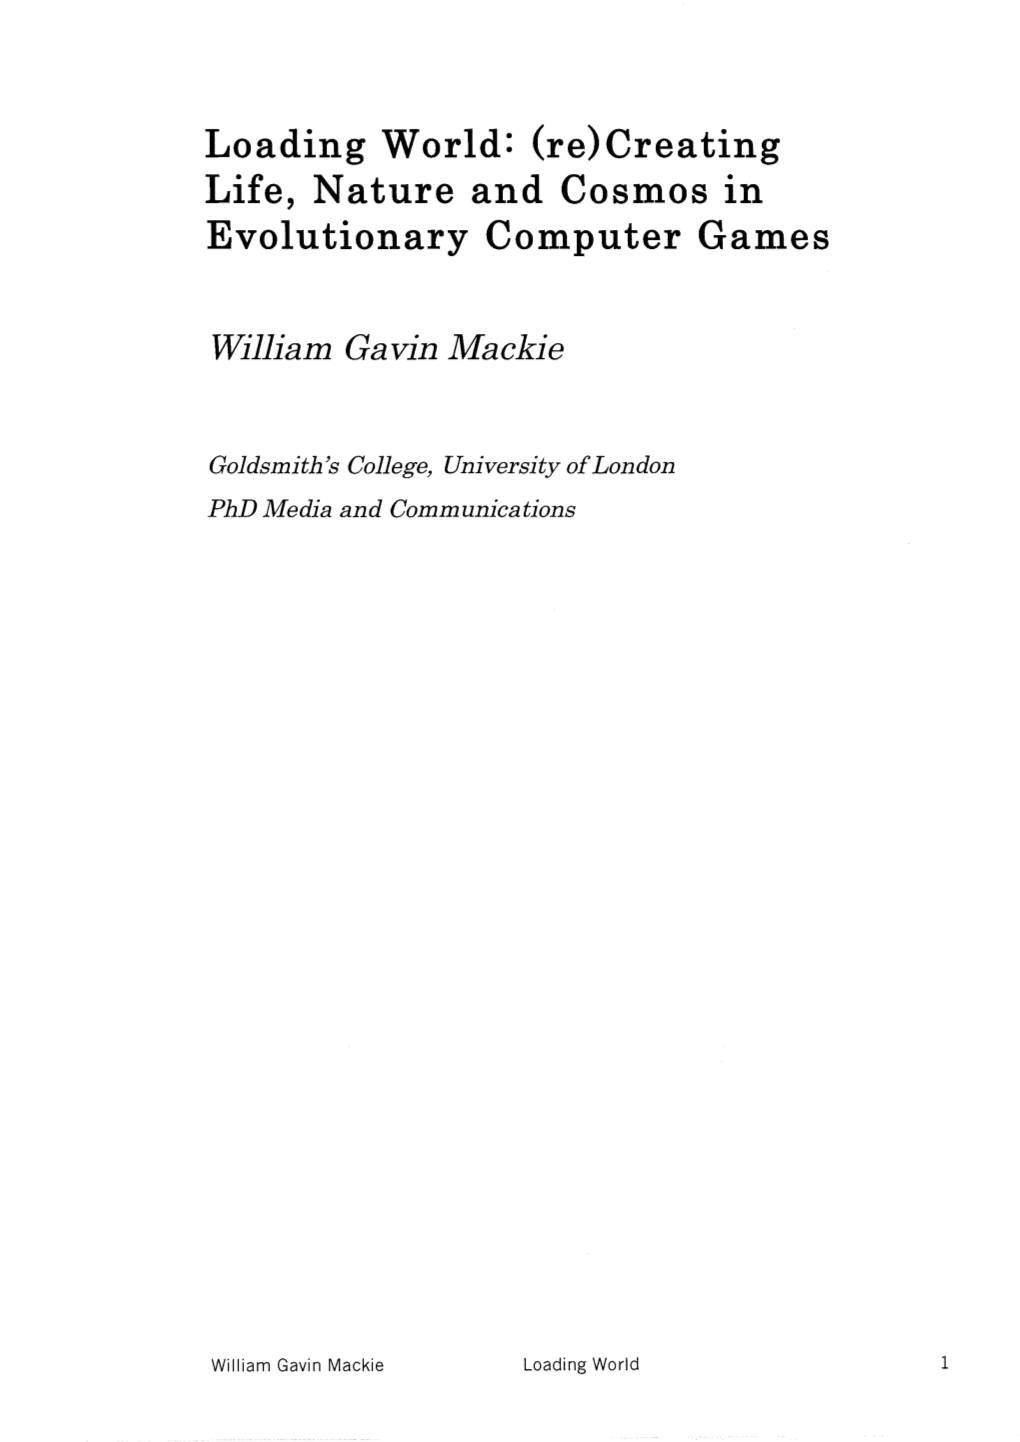 Loading World: (Re)Creating Life, Nature and Cosmos in Evolutionary Computer Games